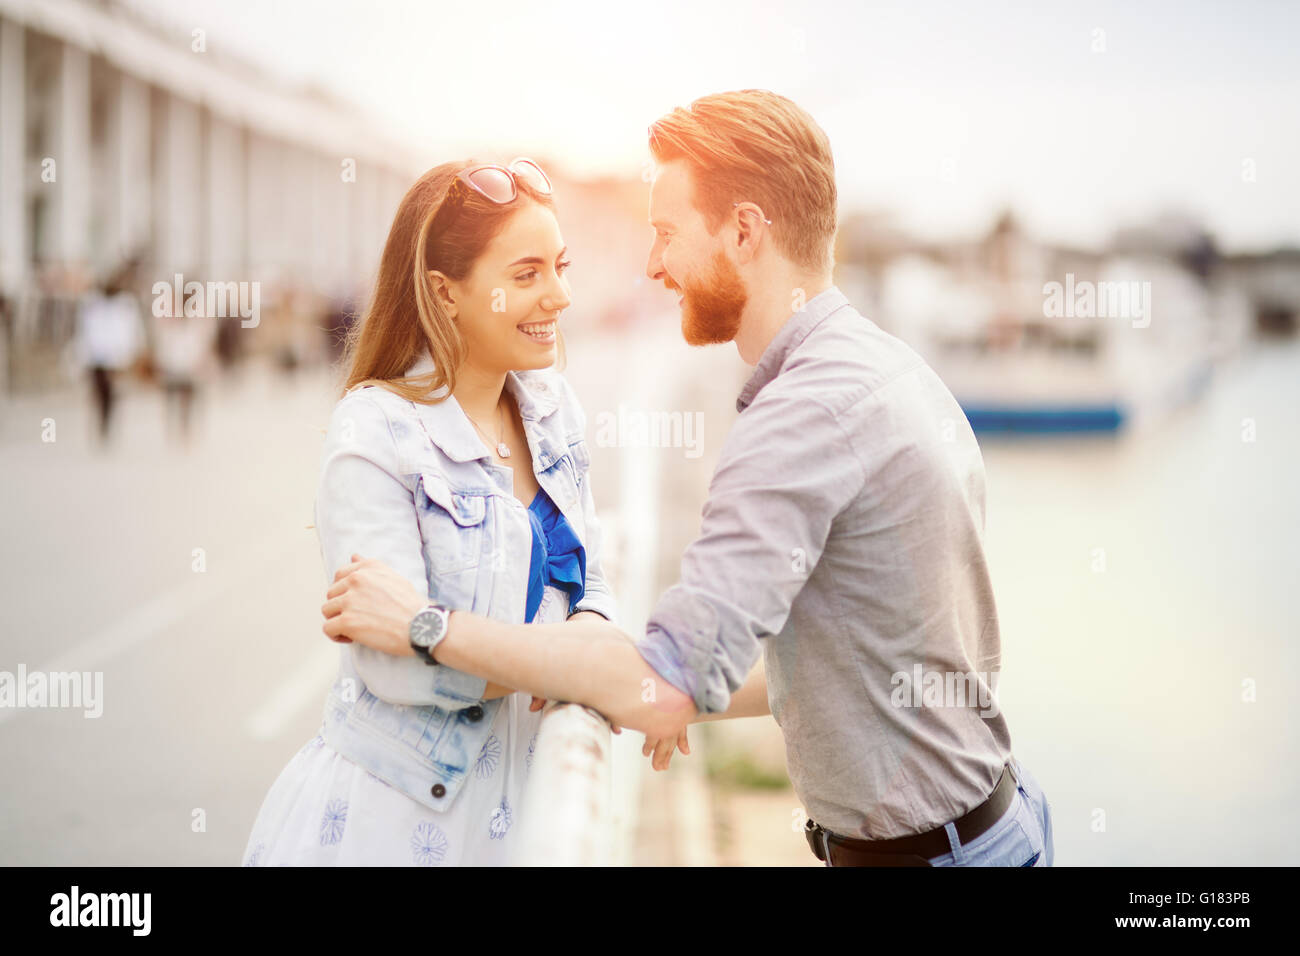 Couple in love sharing emotions in beautiful sunset Stock Photo